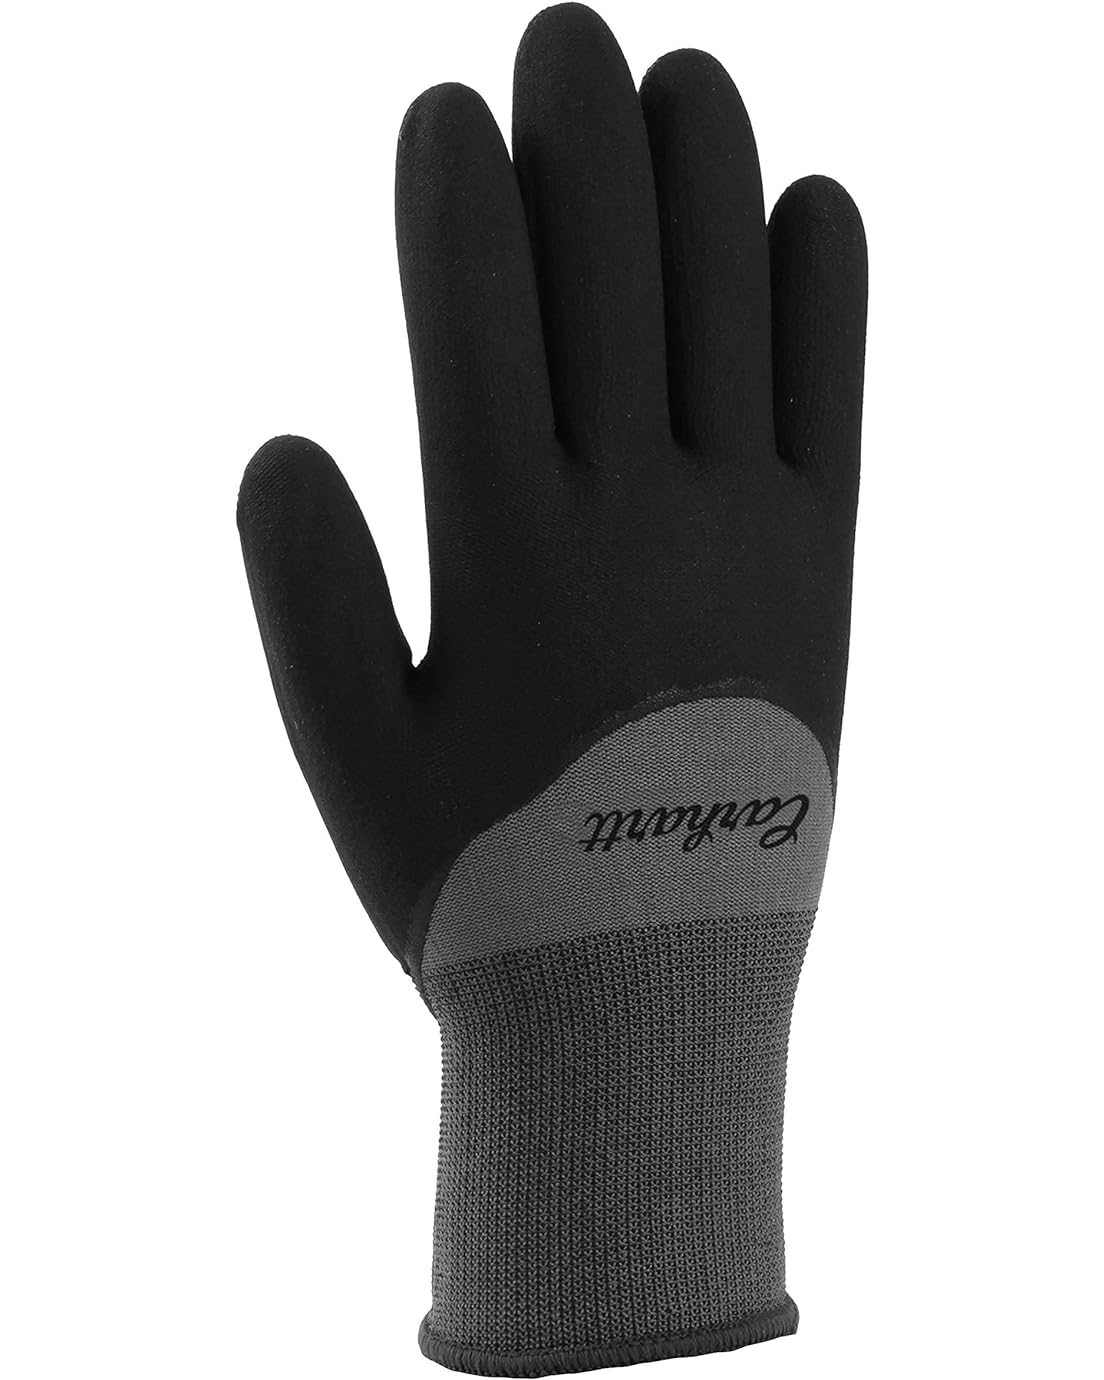 Carhartt Womens Thermal-lined Full Coverage Nitrile Glove